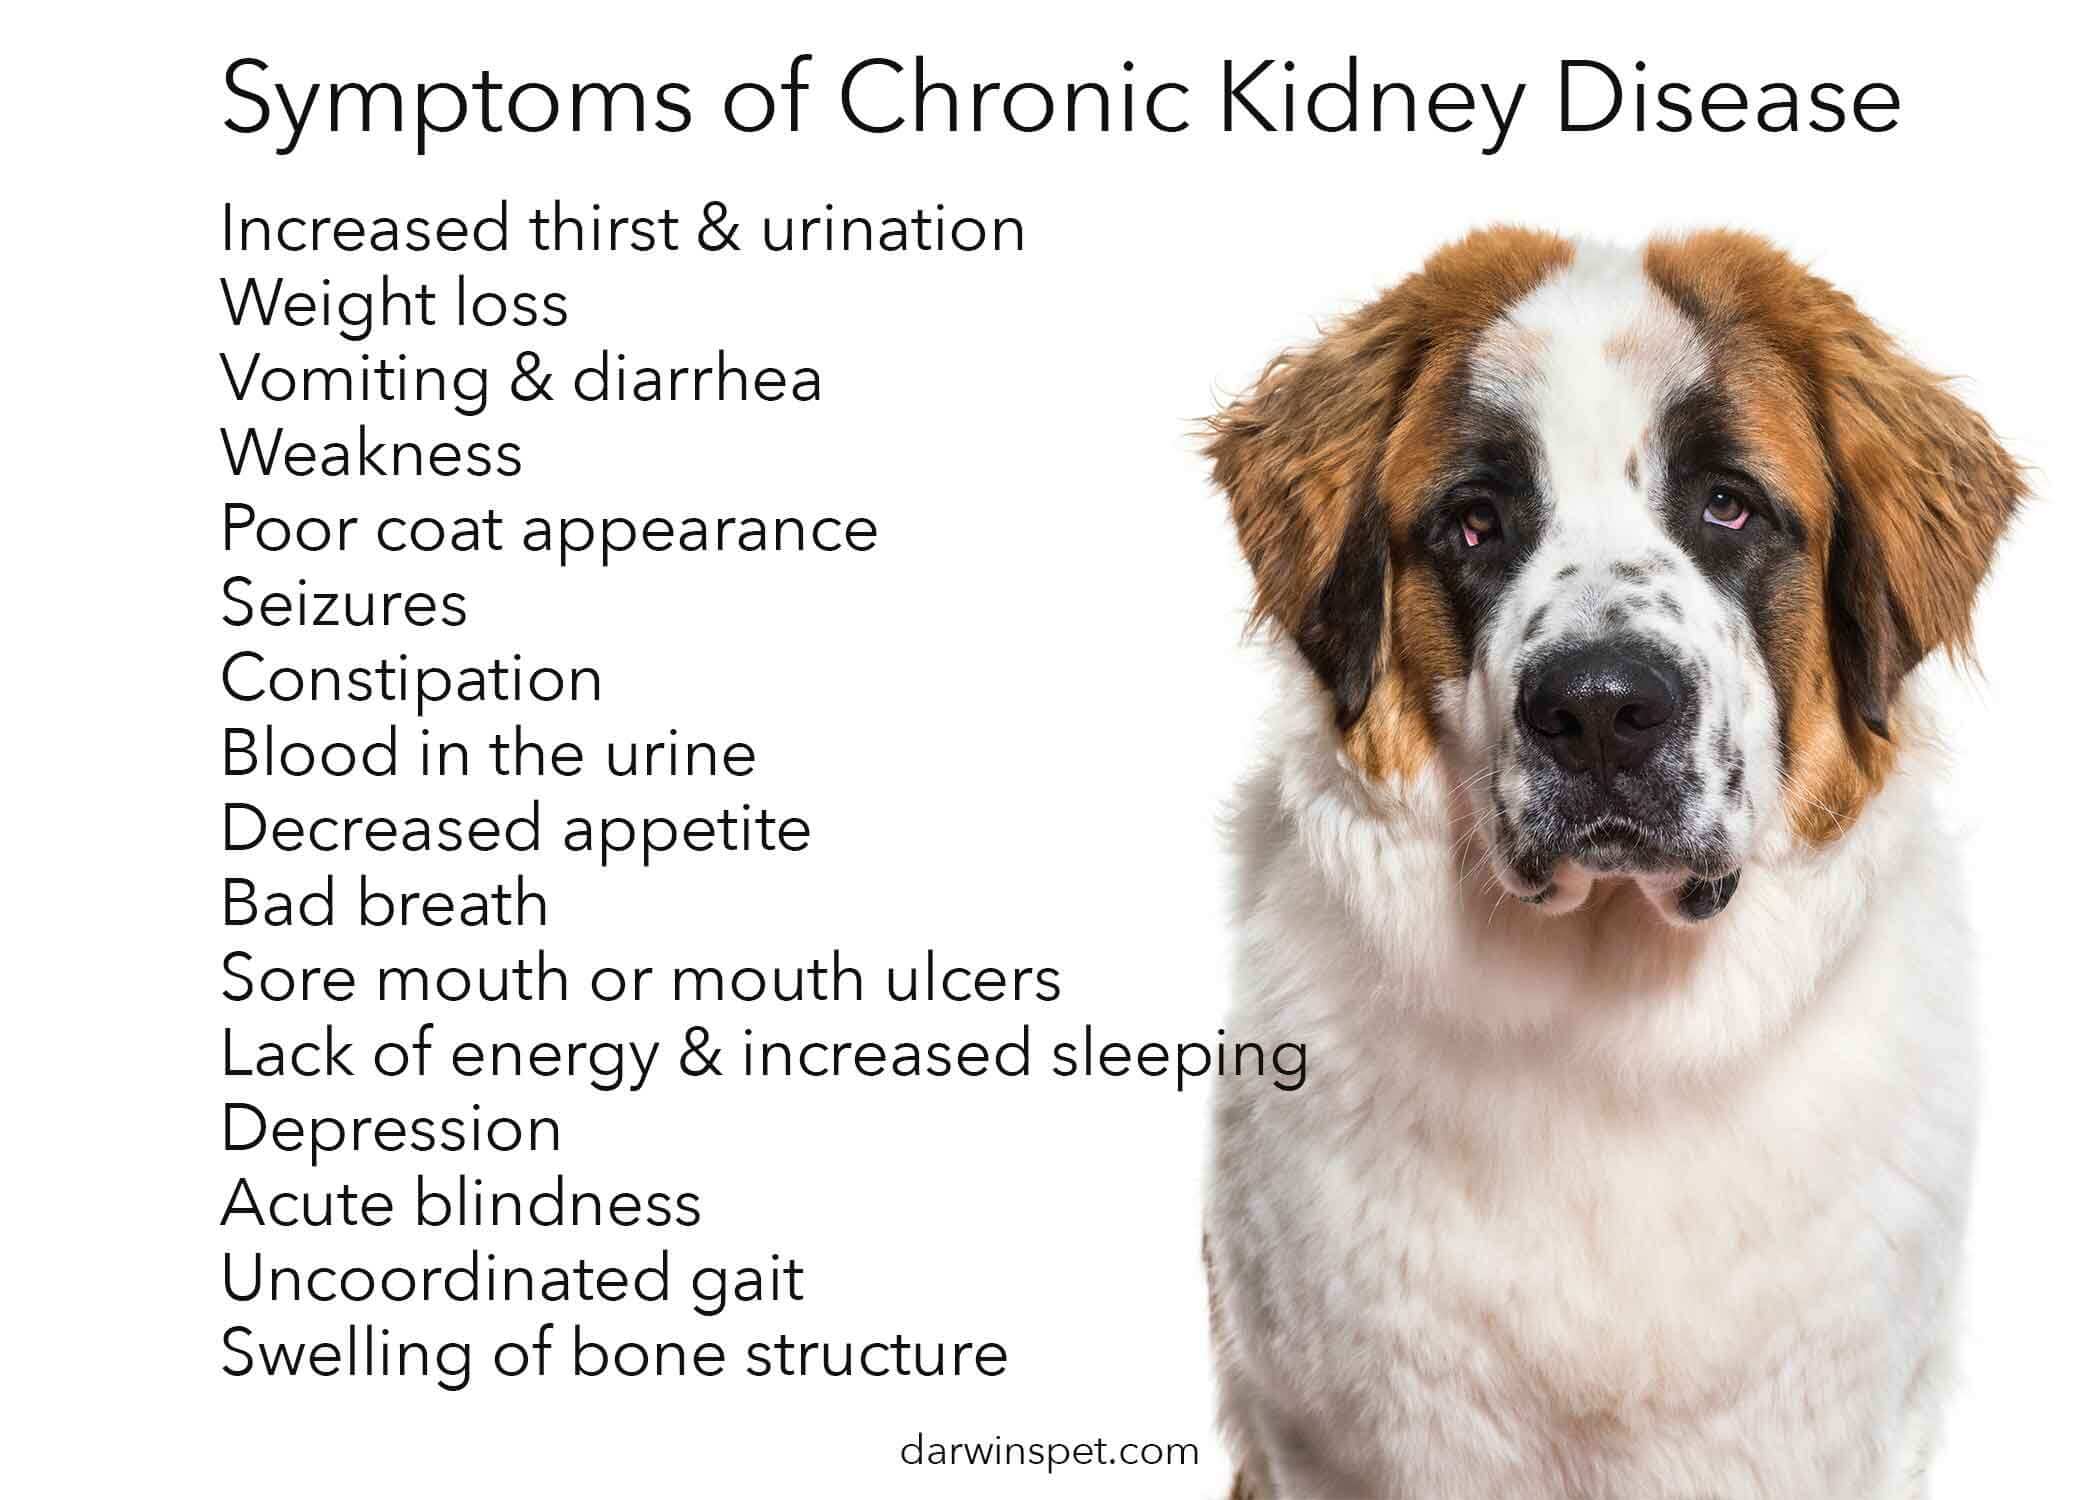 how long can a dog live with kidney failure without treatment